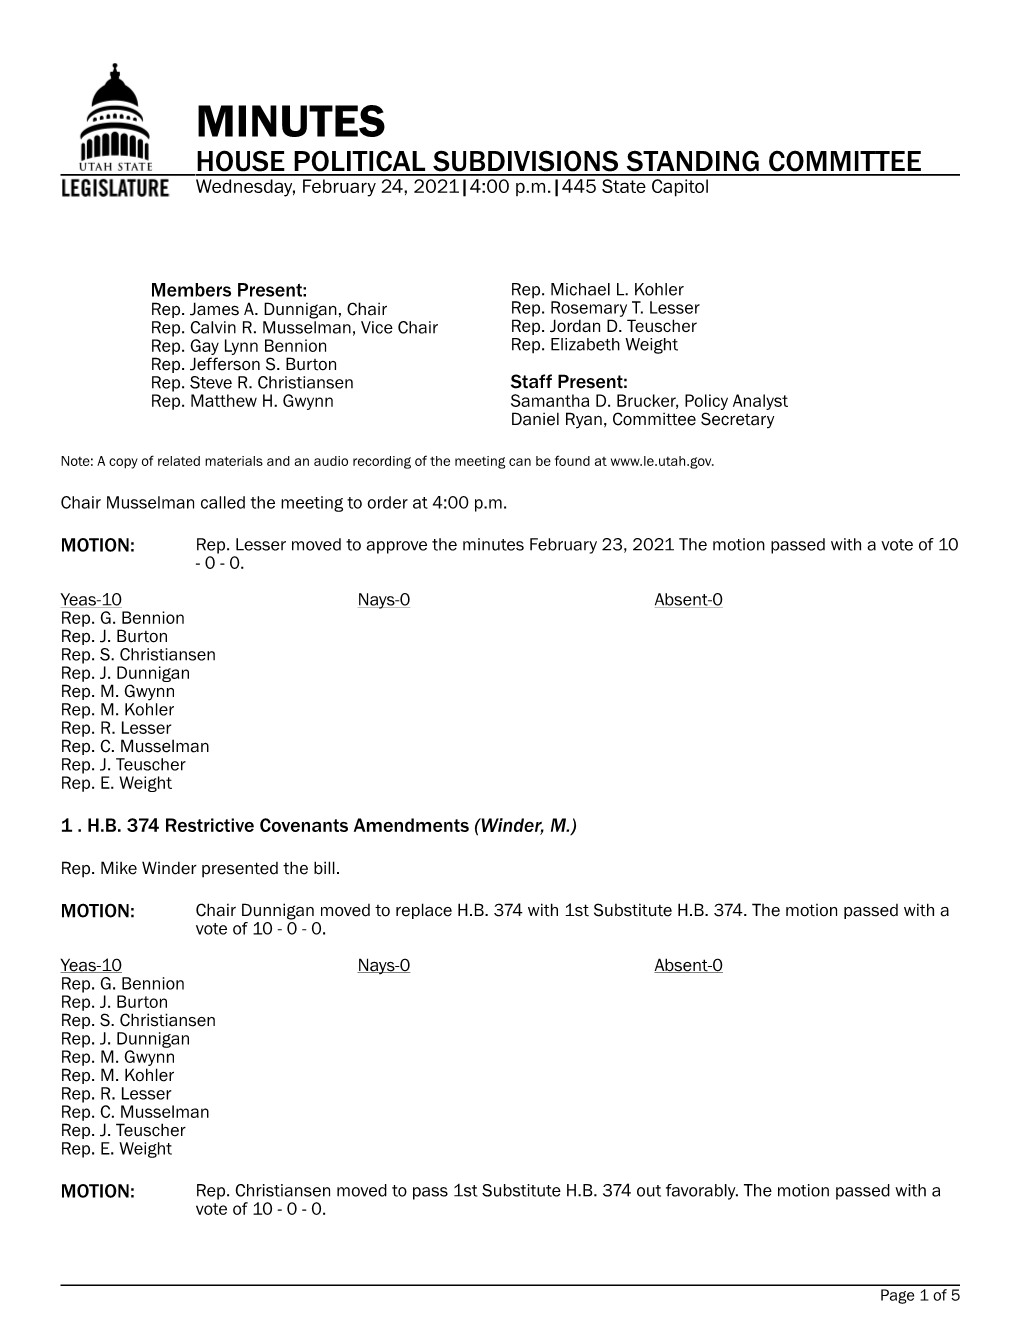 MINUTES HOUSE POLITICAL SUBDIVISIONS STANDING COMMITTEE Wednesday, February 24, 2021|4:00 P.M.|445 State Capitol